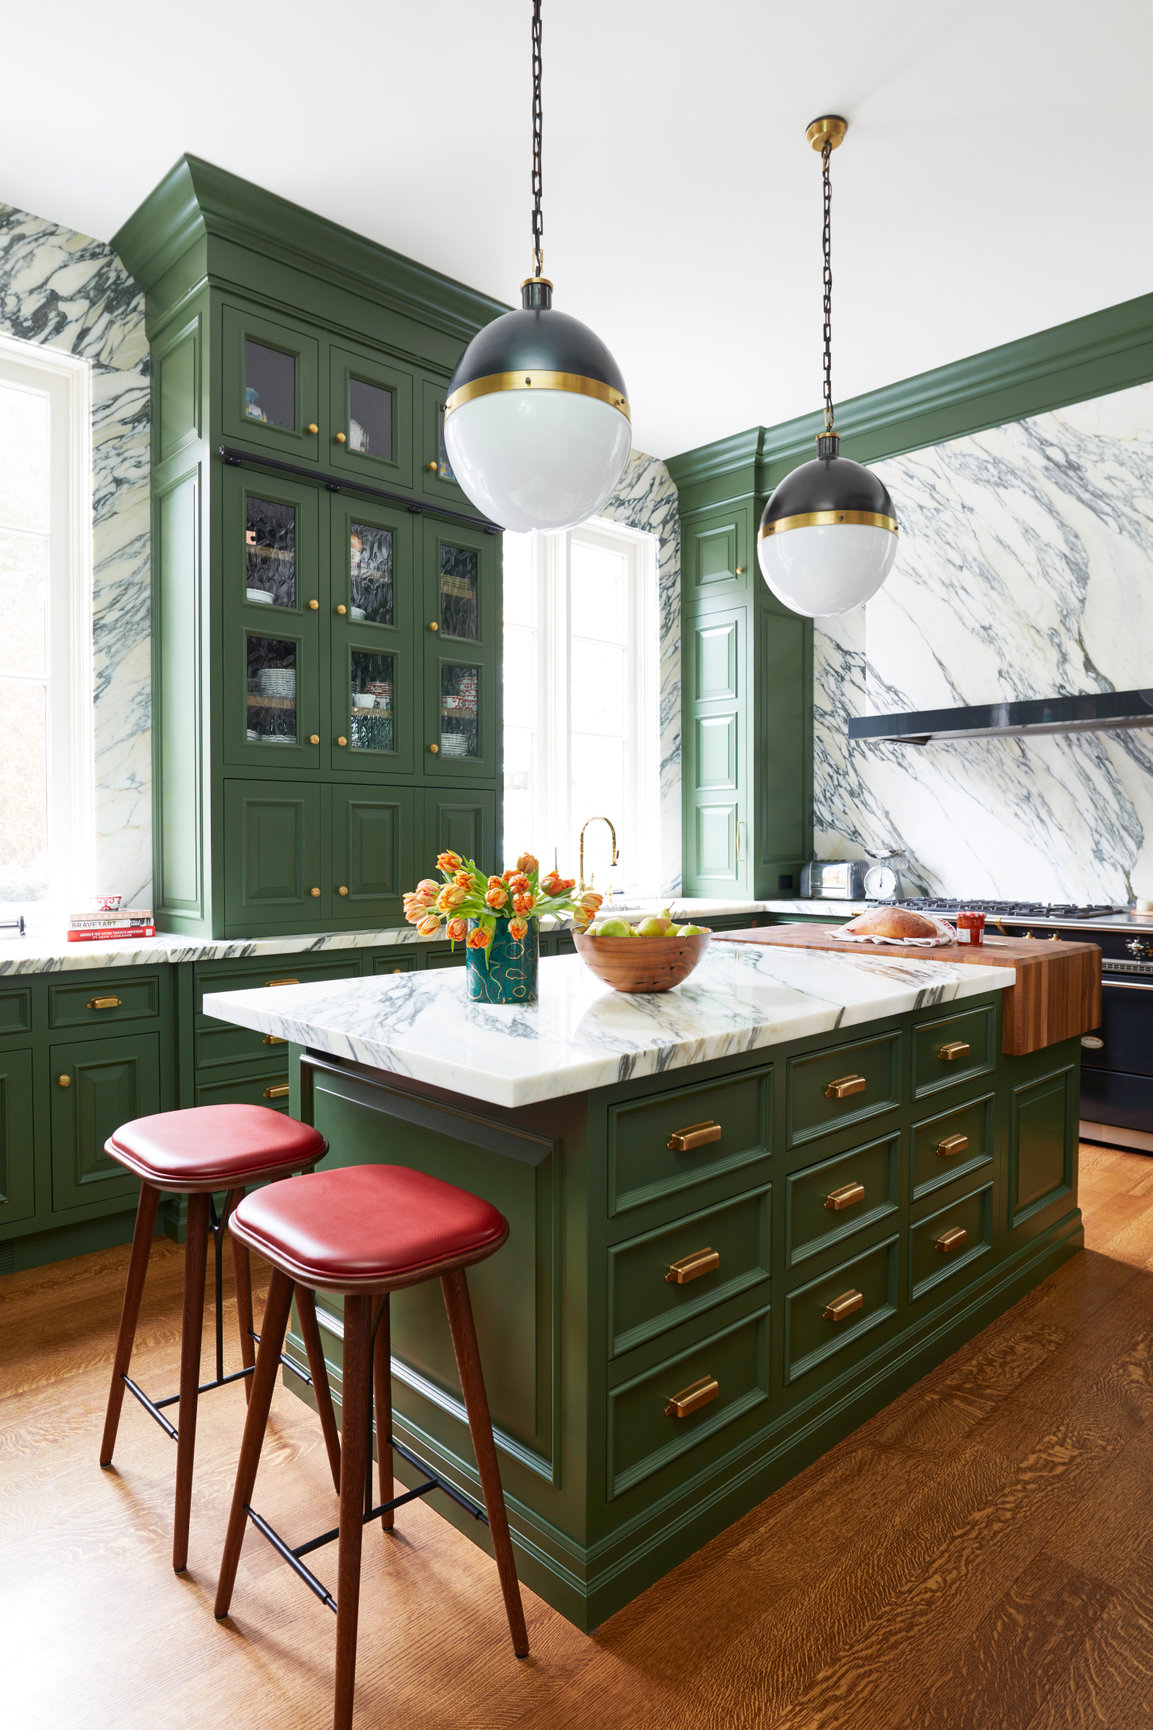 Top Kitchen Colour Trends For 2021 - Bloomsbury Fine Cabinetry Inc.